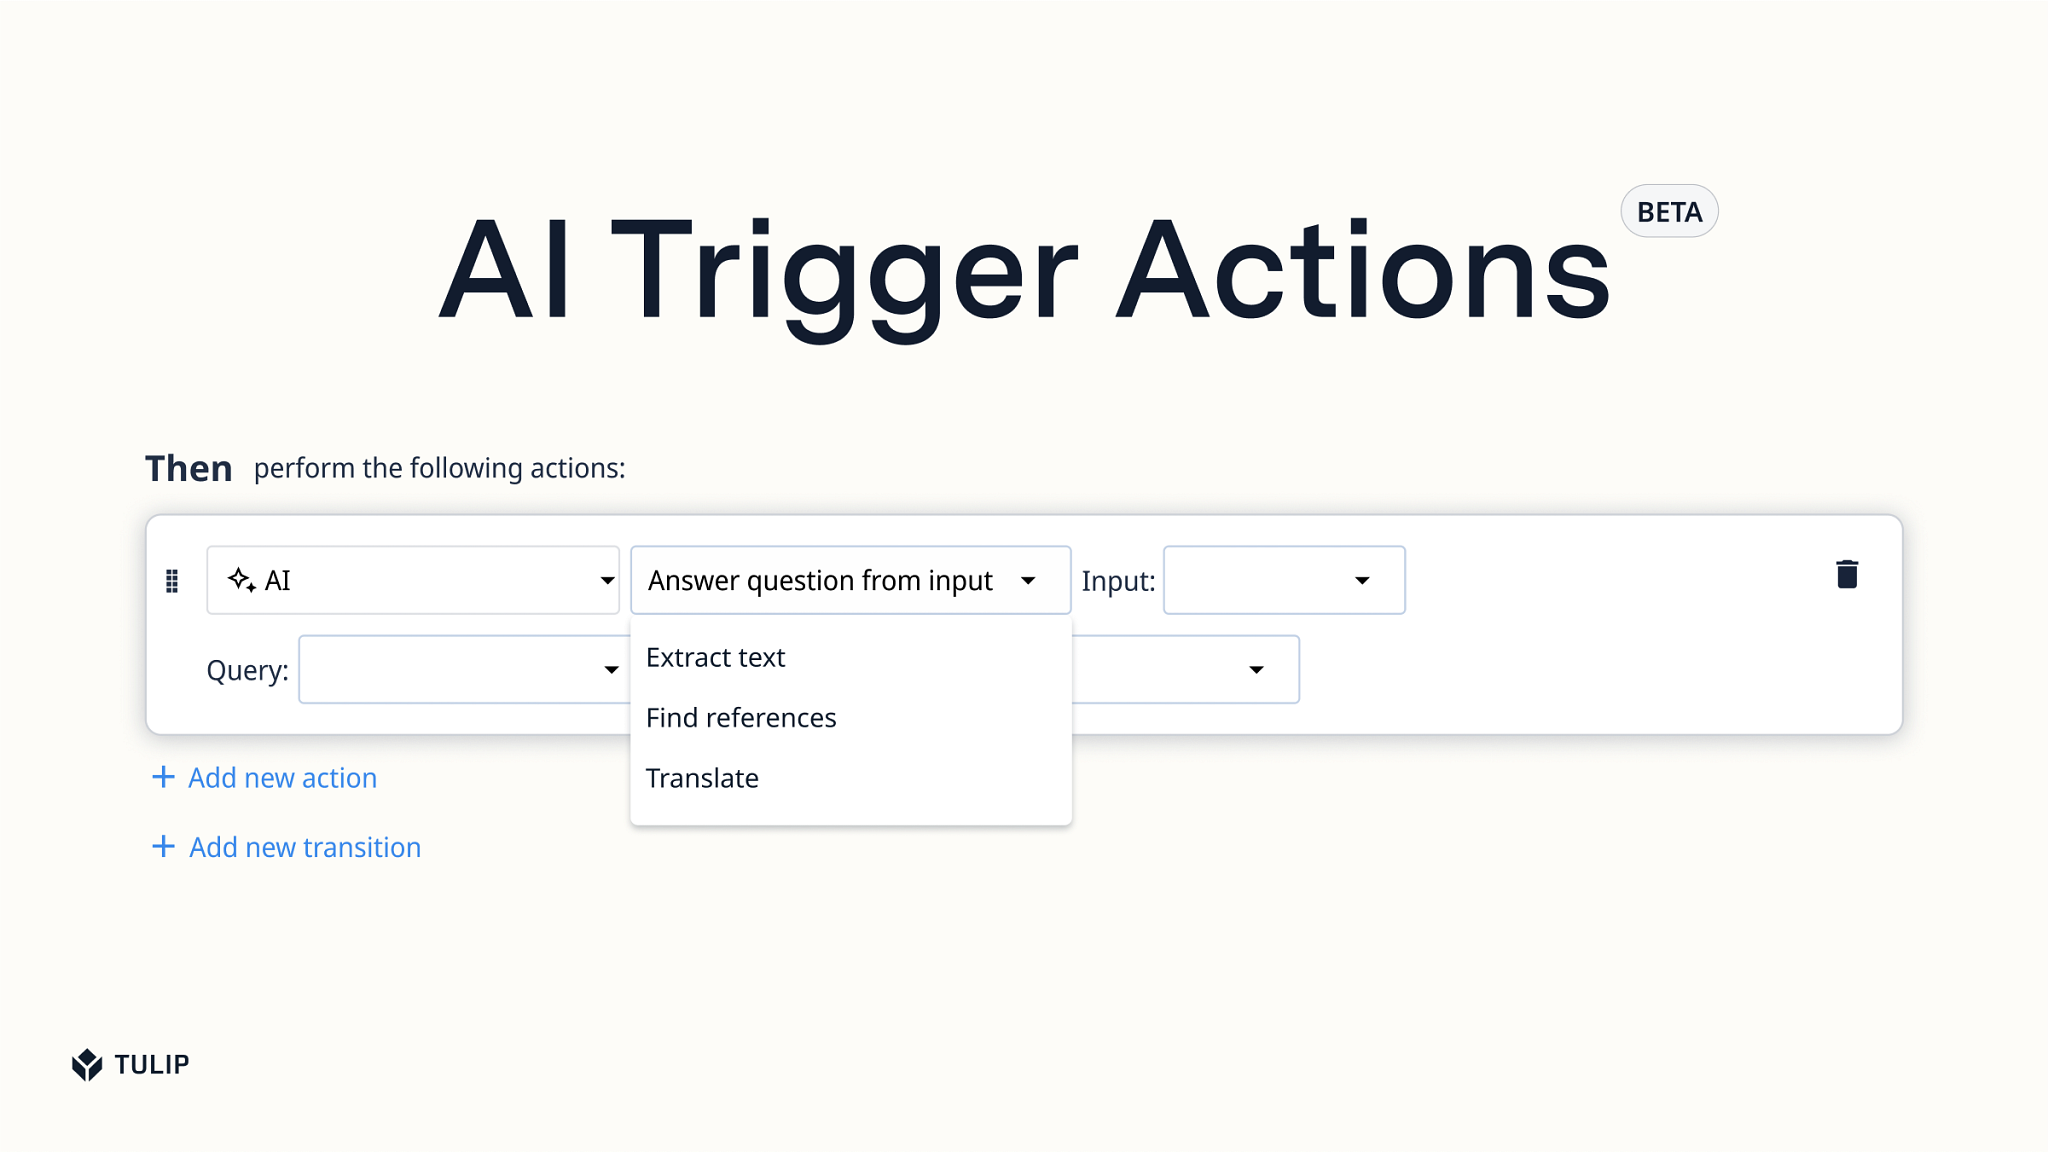 Screenshot of AI Trigger Actions software interface in Tulip with the text "AI Trigger Actions Beta"